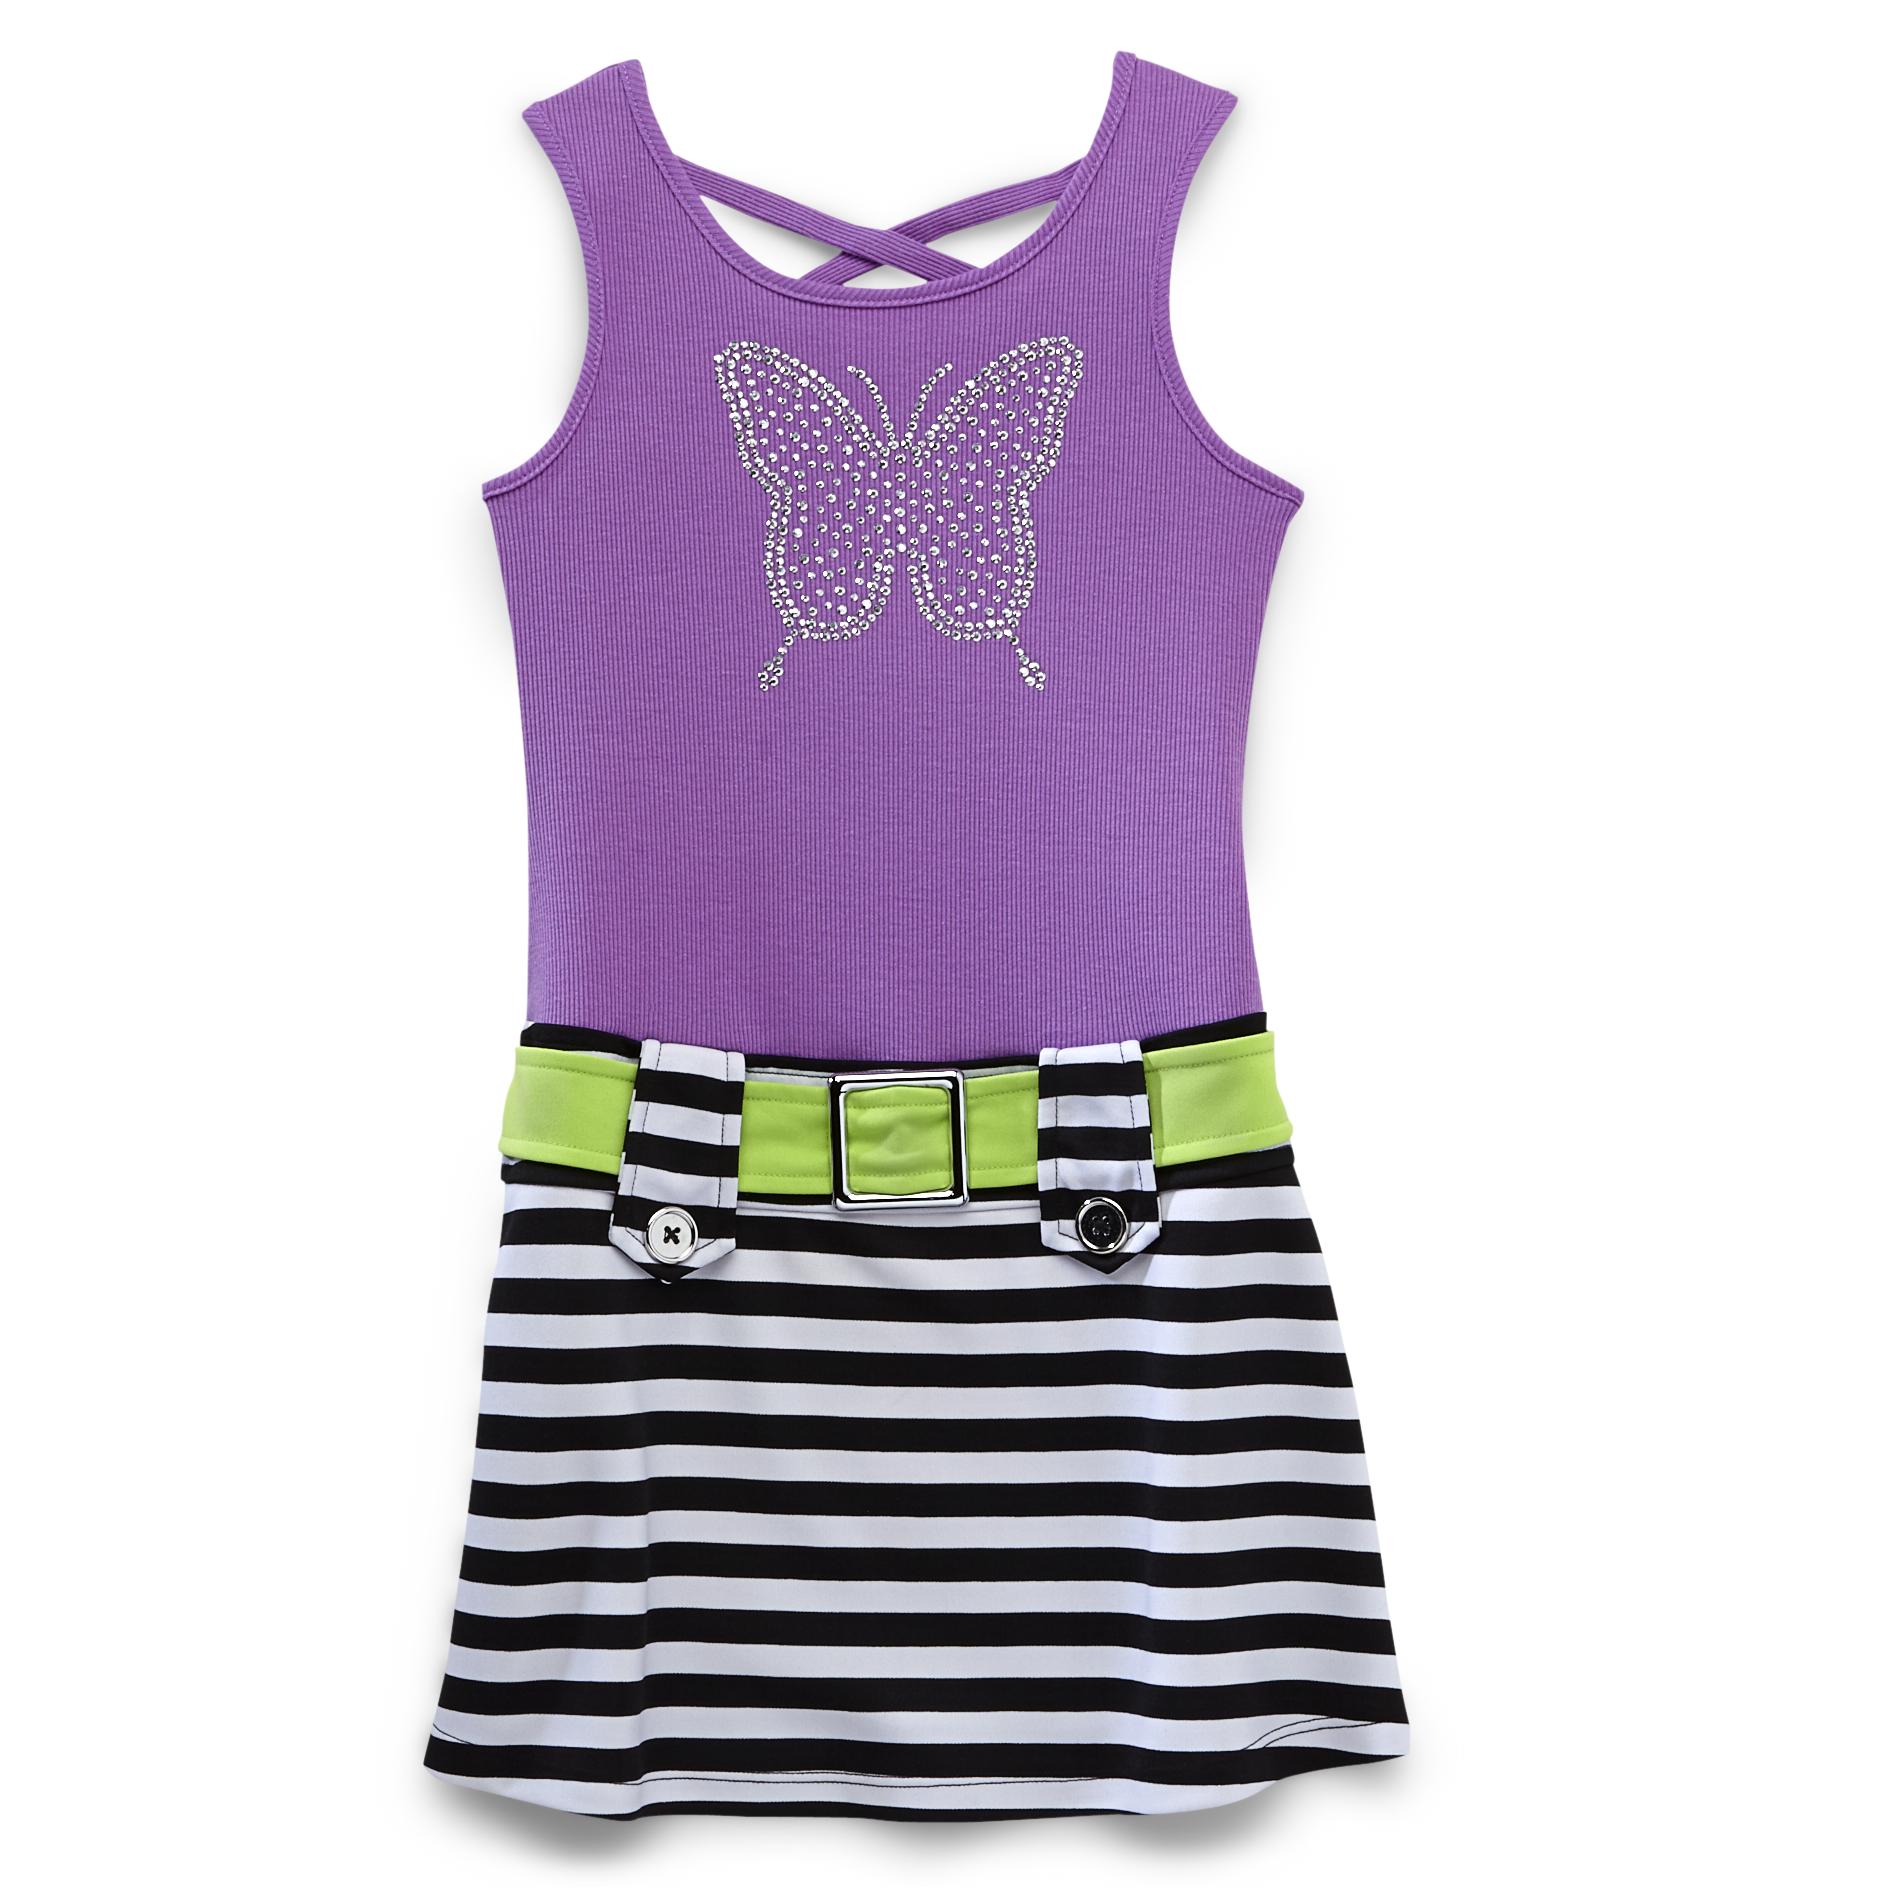 Piper Girl's Belted Dress - Butterfly